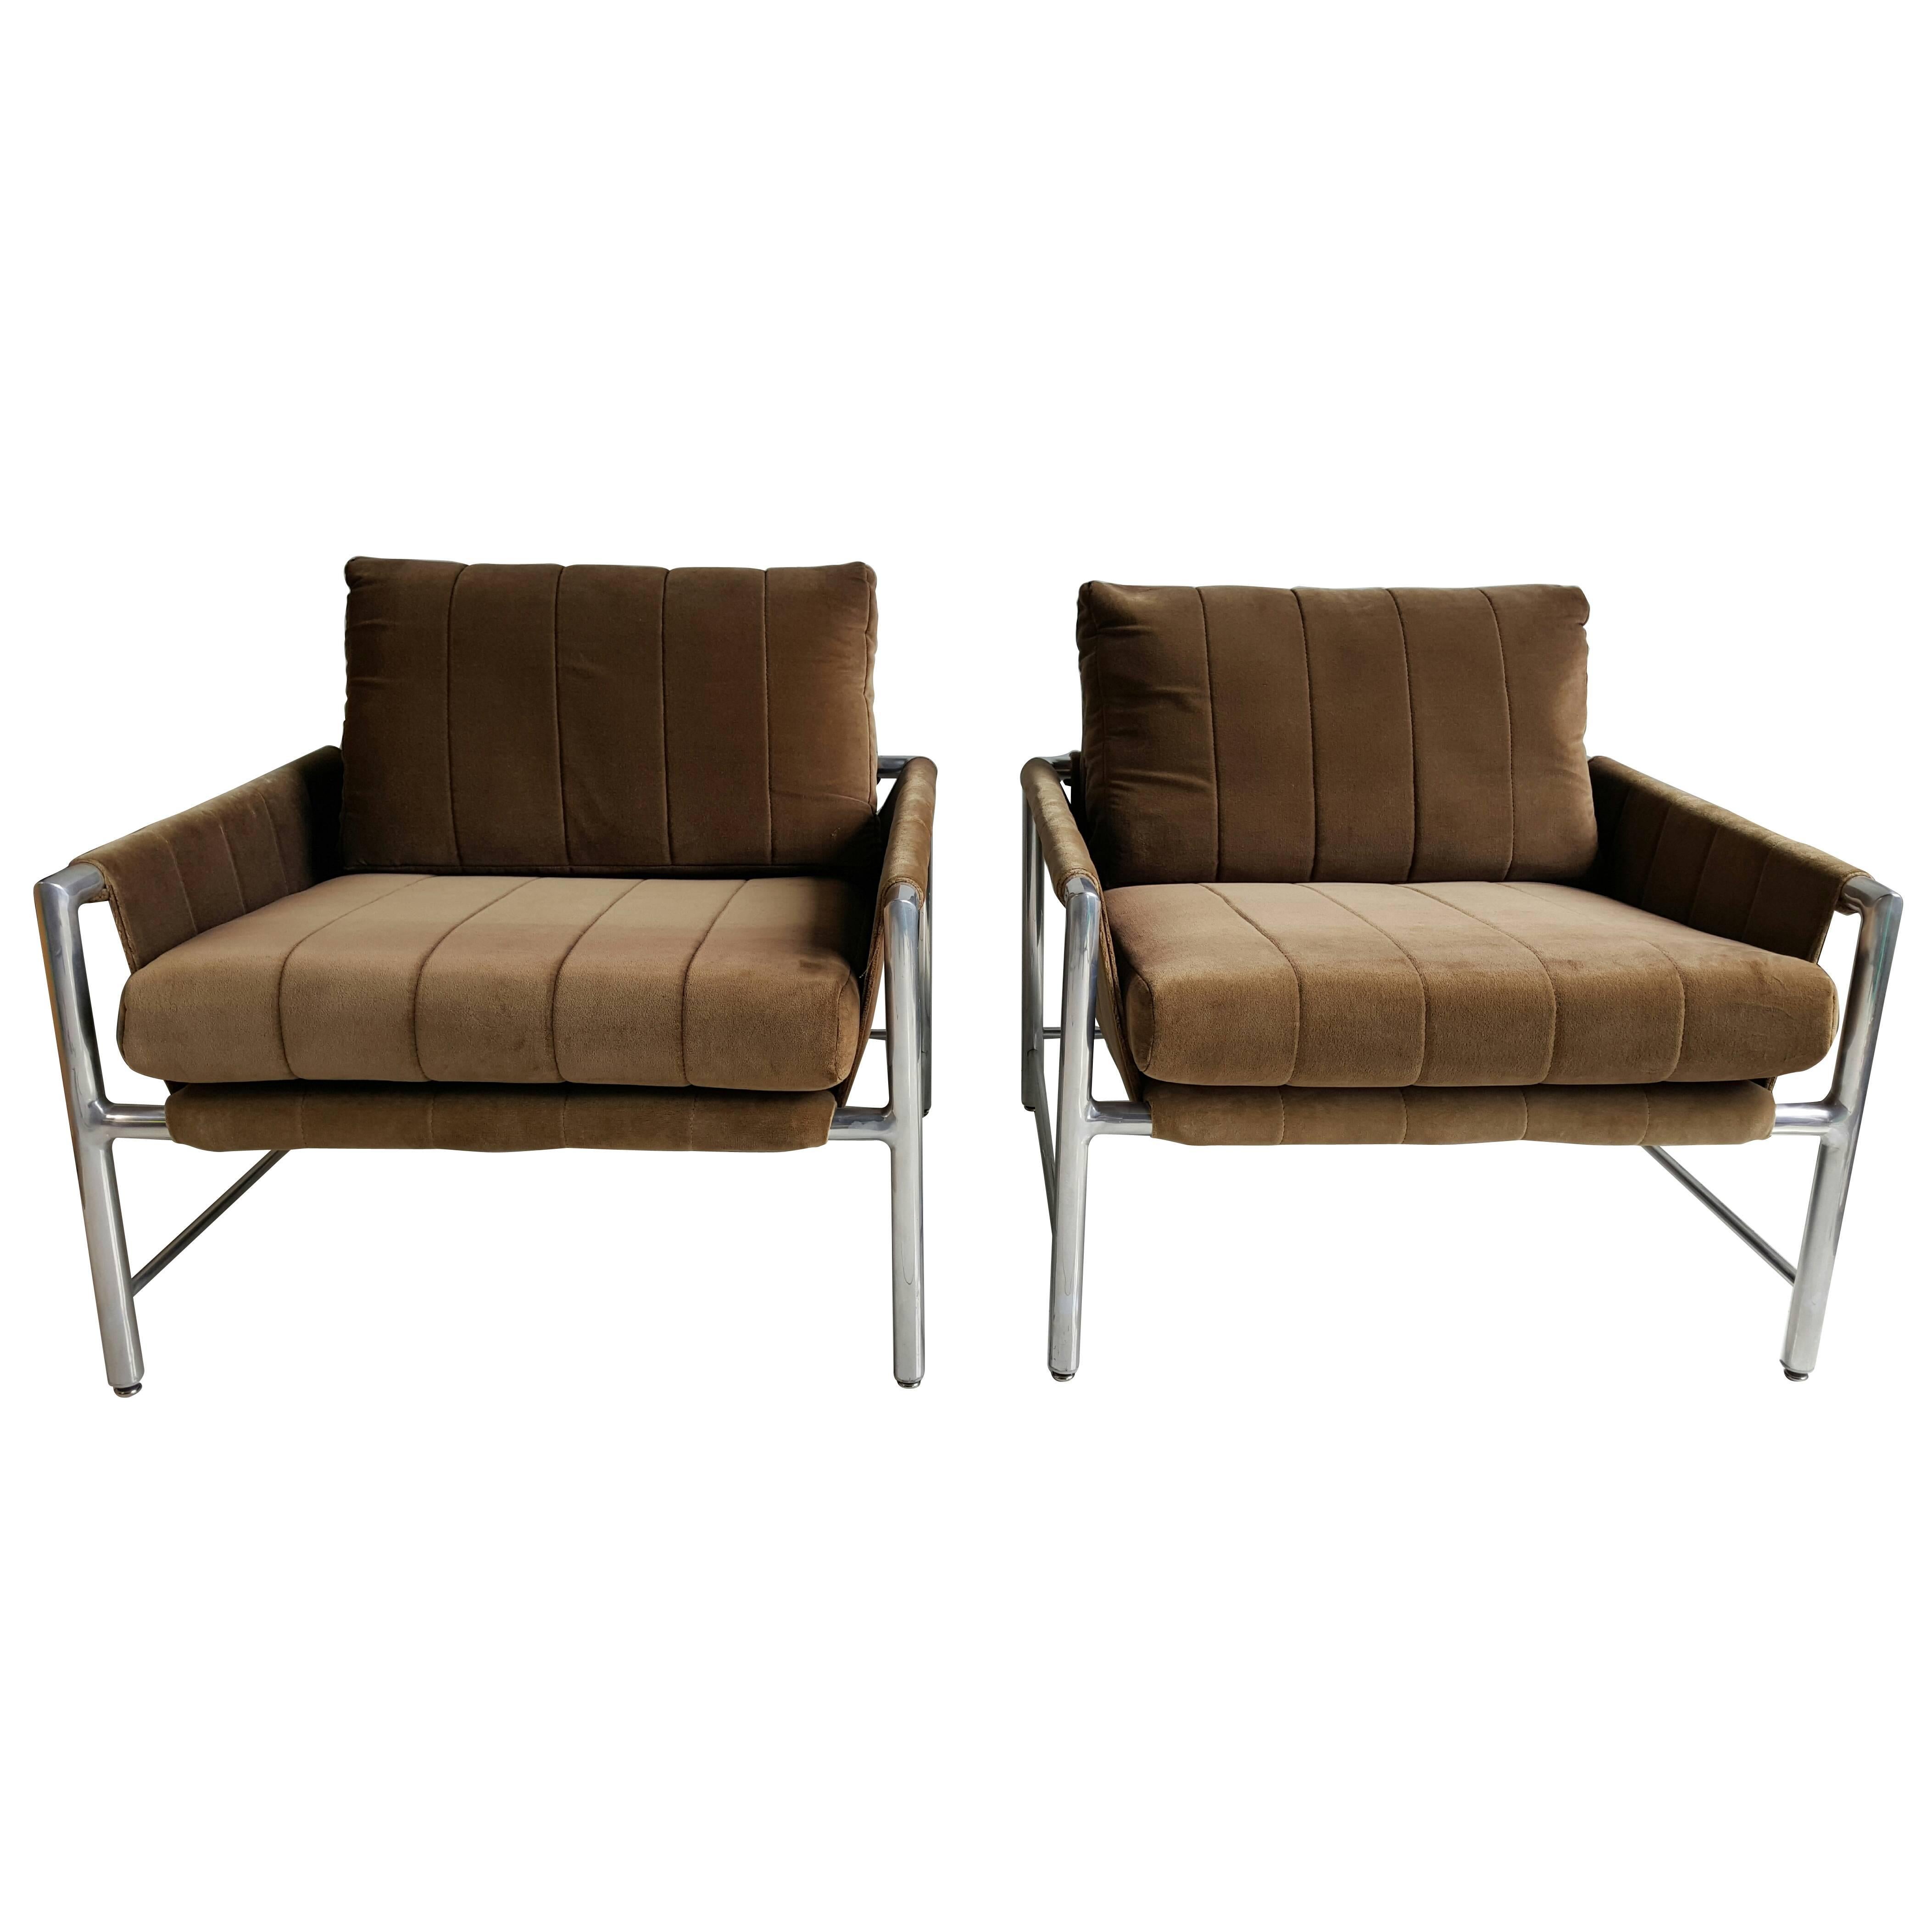 Pair of Extruded Aluminum and Velvet Sling Lounge Chairs by Founders